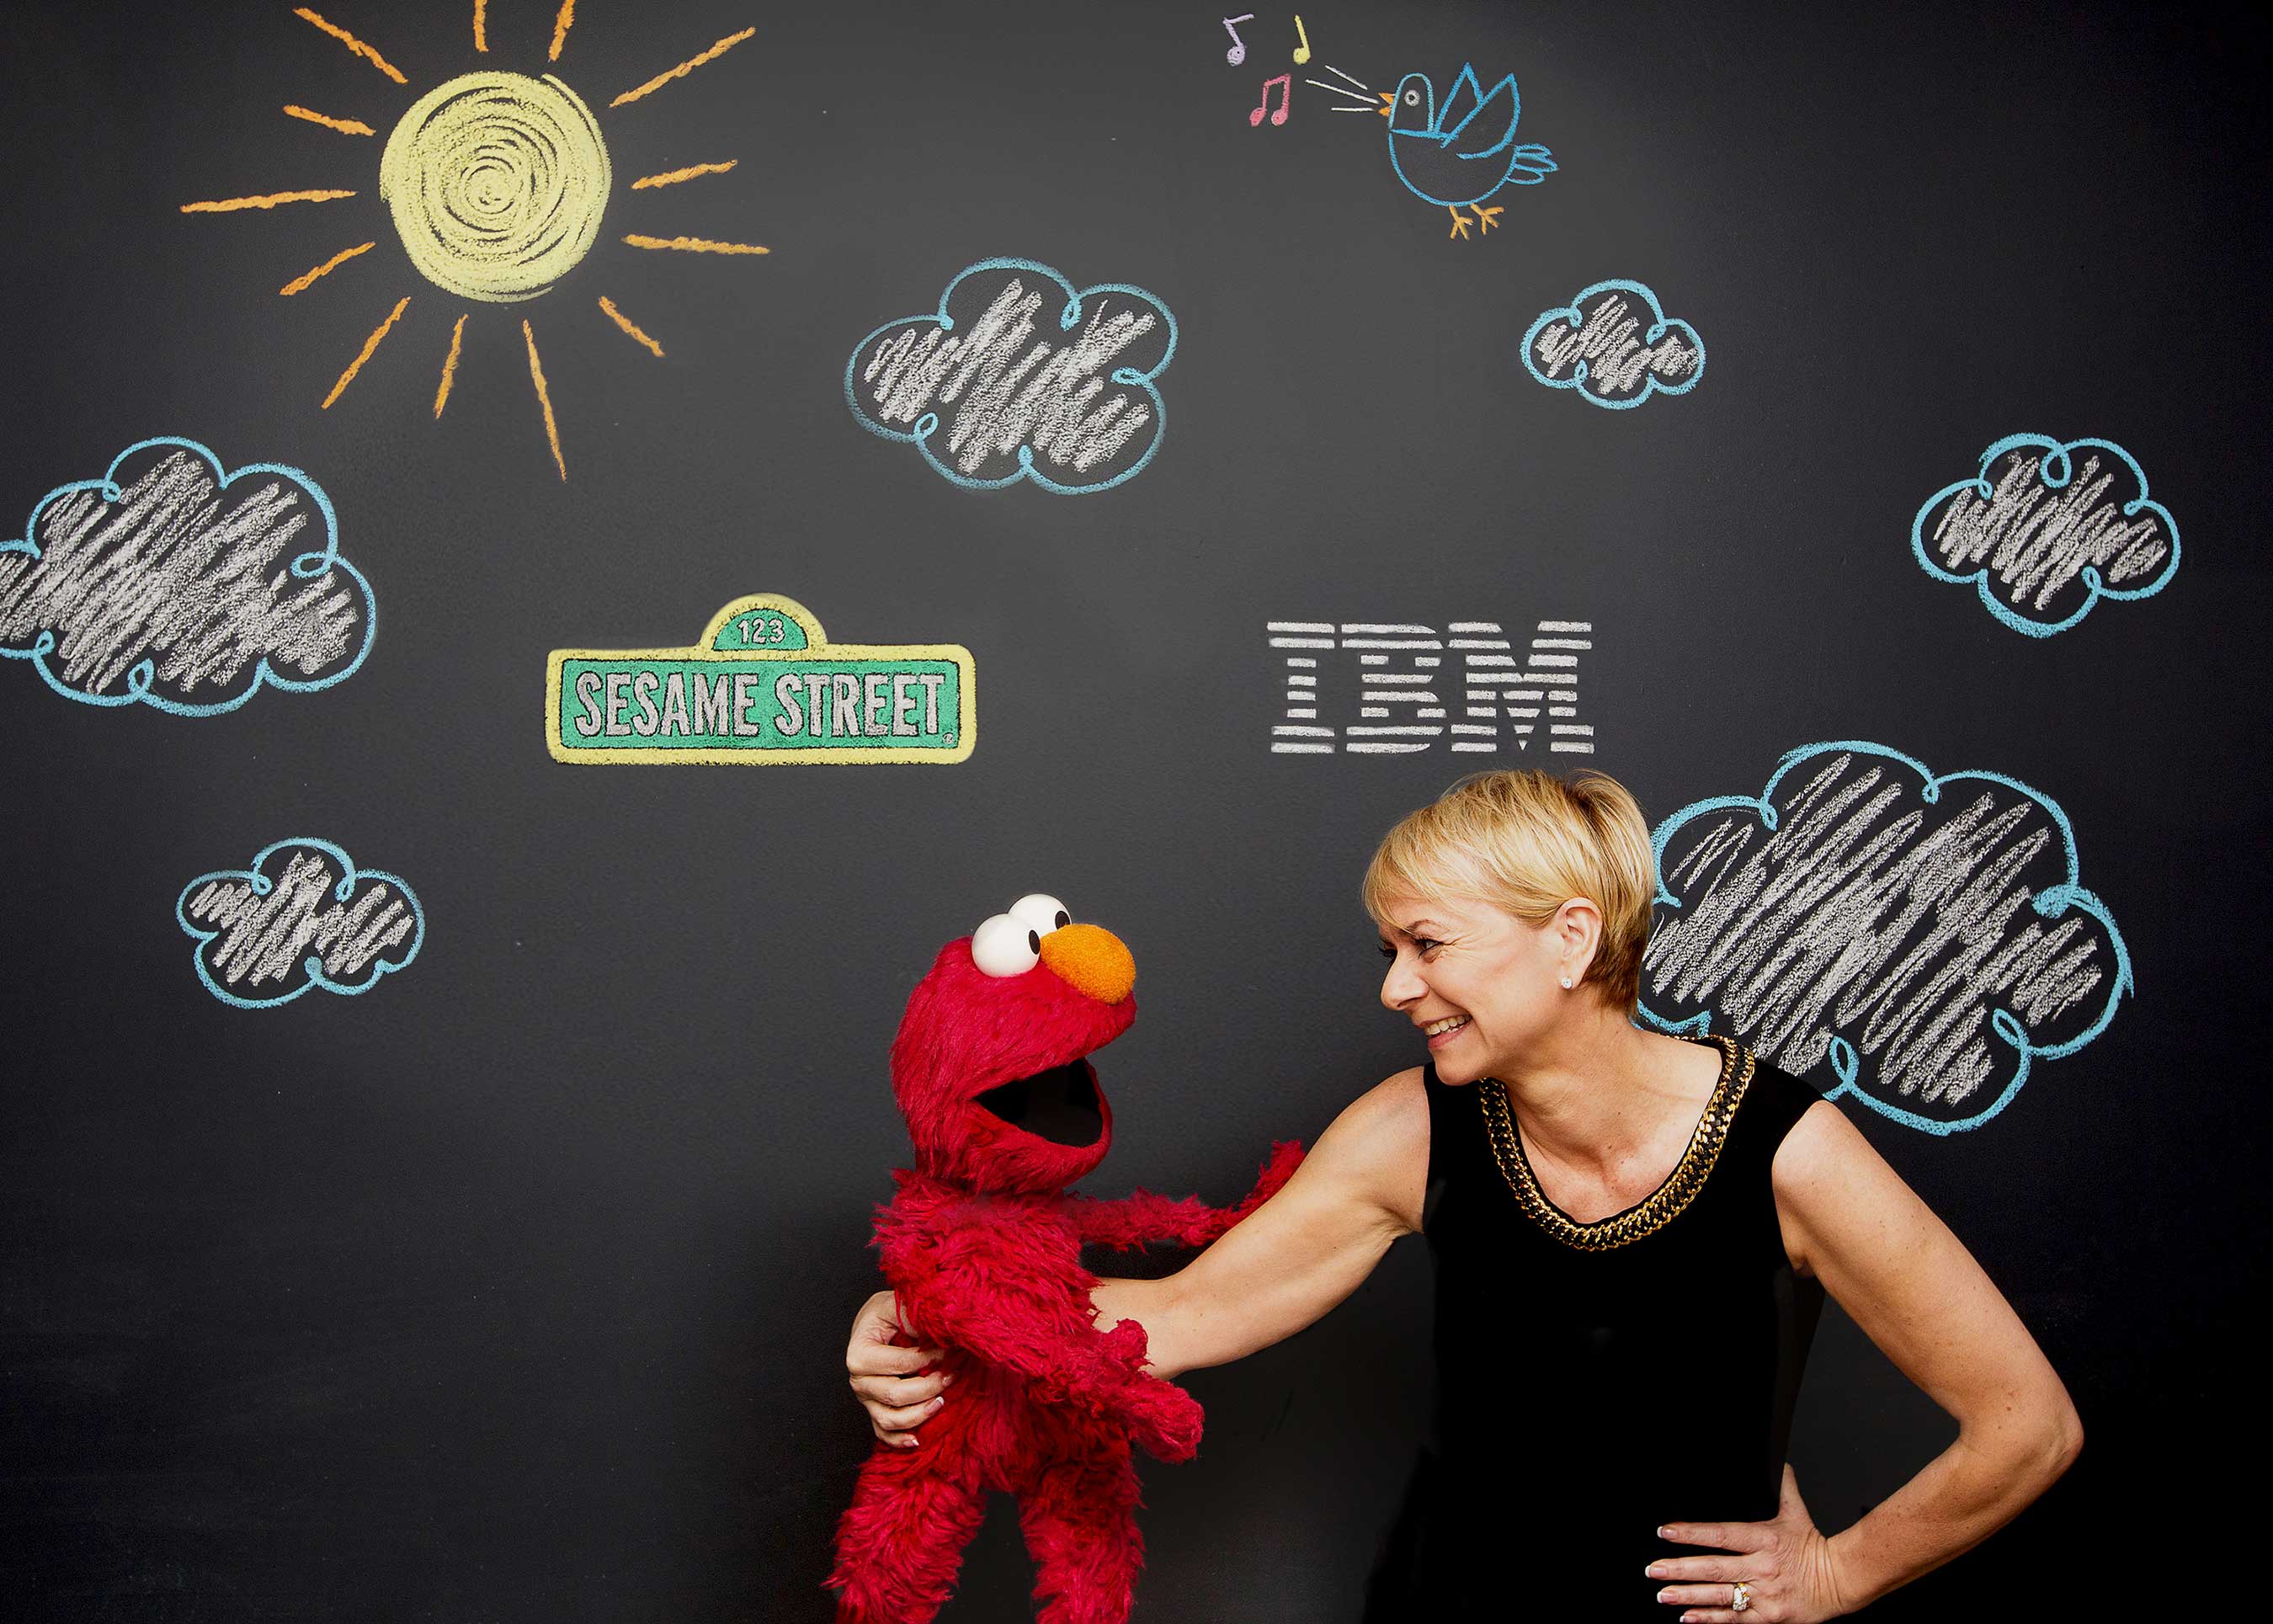 As part of a three-year agreement, Sesame Workshop and IBM Watson are developing a new category of educational products that aim to adapt to the learning styles and aptitudes of individual preschoolers. Pictured here are Harriet Green, IBM General Manager of Watson Internet of Things, Commerce and Education, and Elmo, 3 1/2 year old monster. (John O'Boyle, Feature Photo Service for IBM)